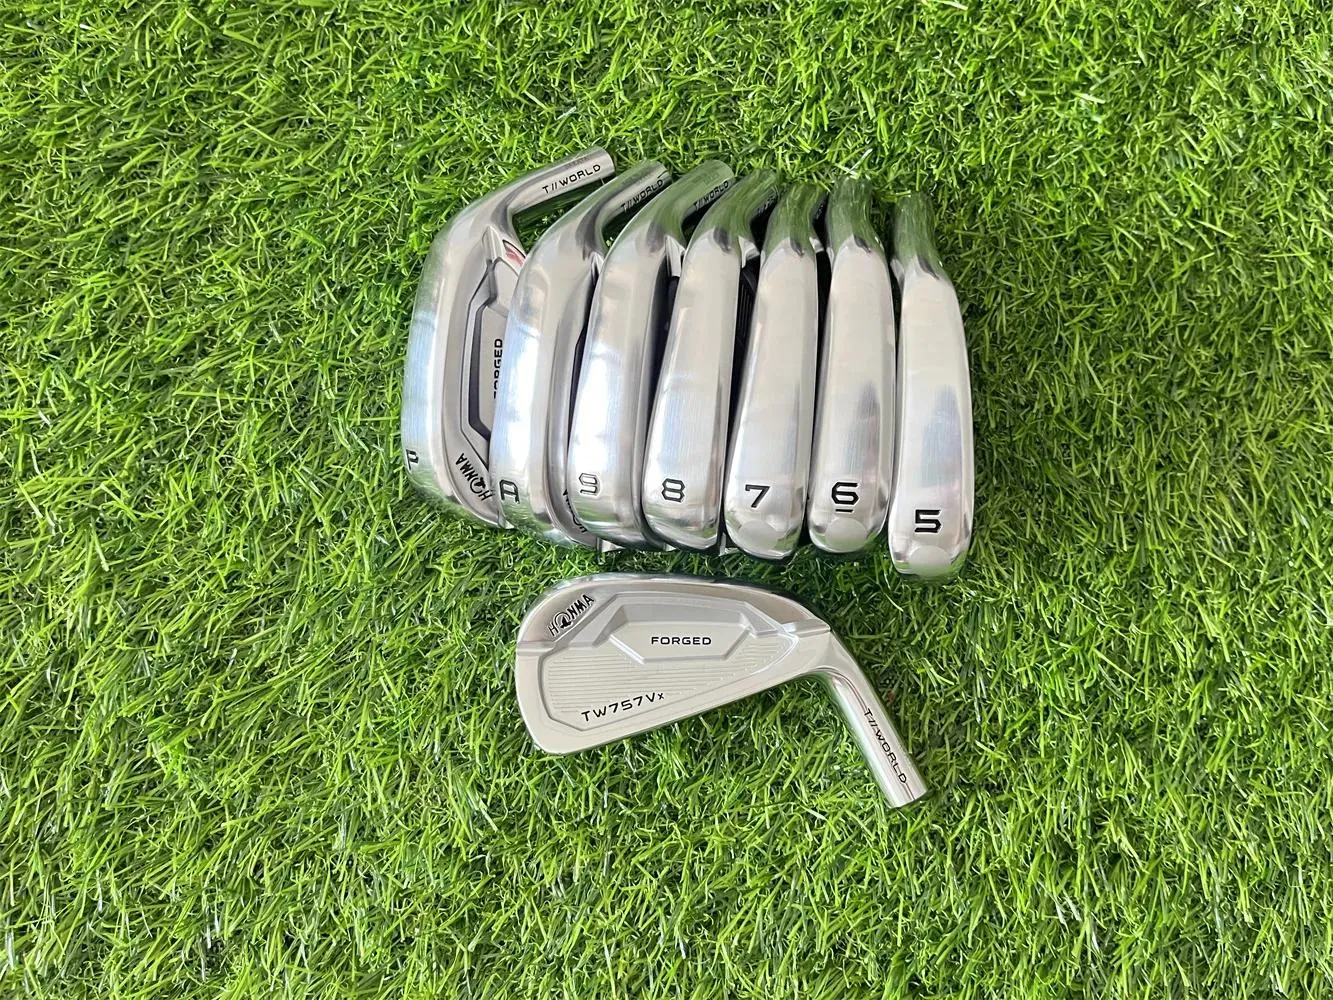 Irons Honma TW757VX Iron Set Honma TW757VX Golf Forged Irons Honma Golf Clubs 49PA R/S Flex Steel Shaft With Head Cover